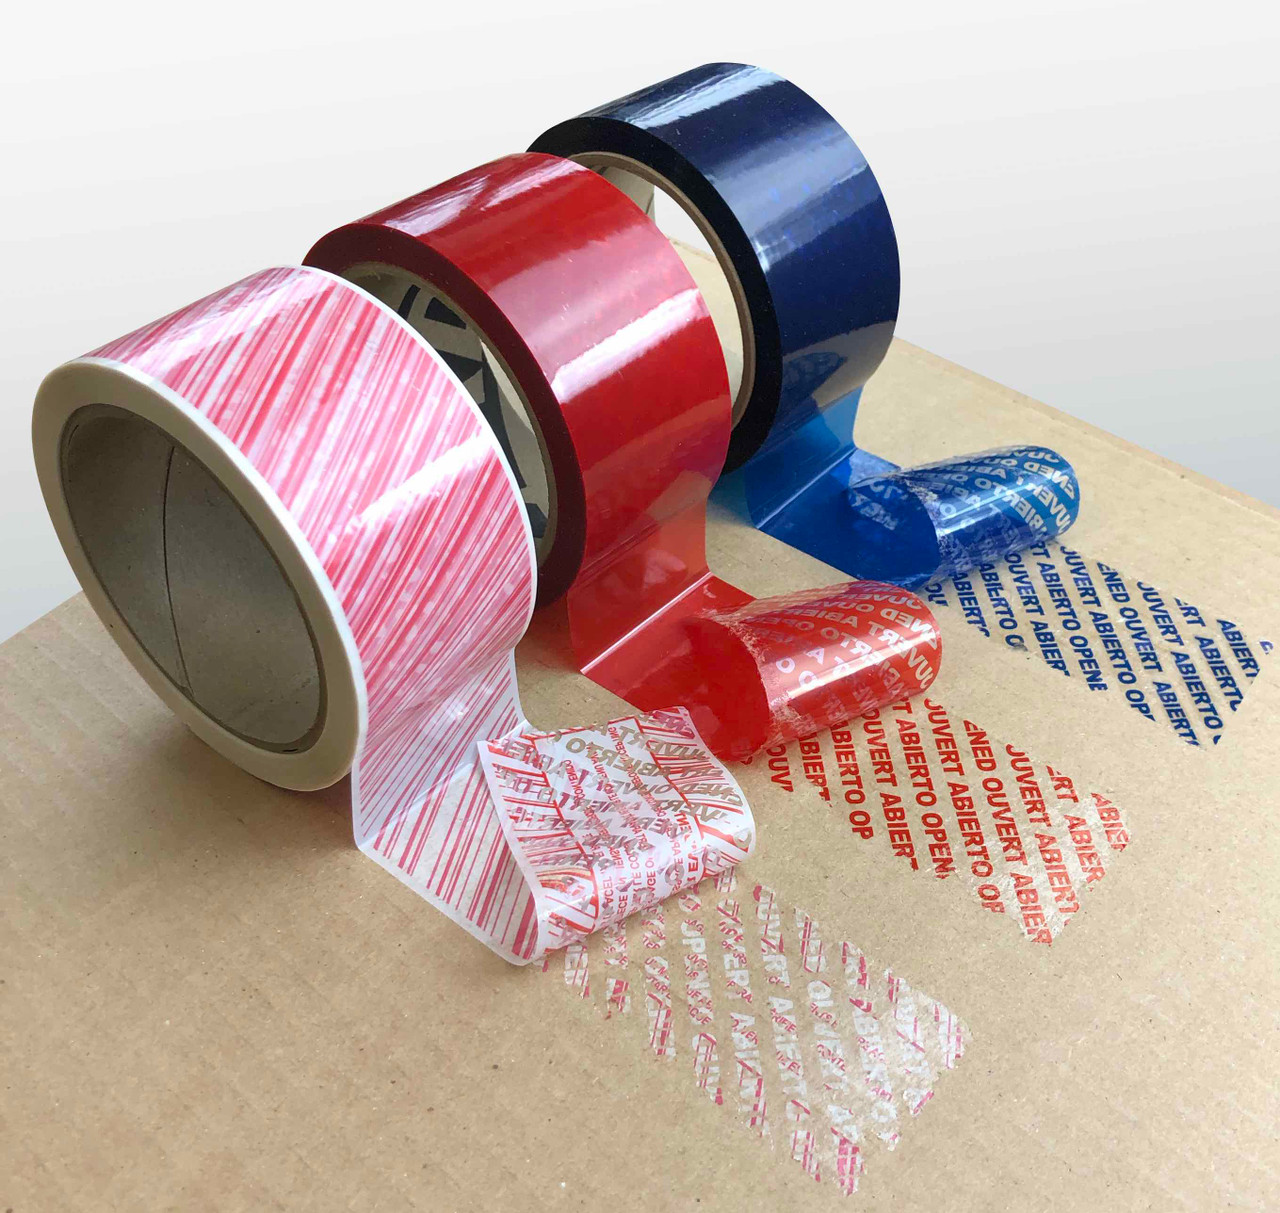 Red Masking Tape, 1W x 60 yds. Red Color